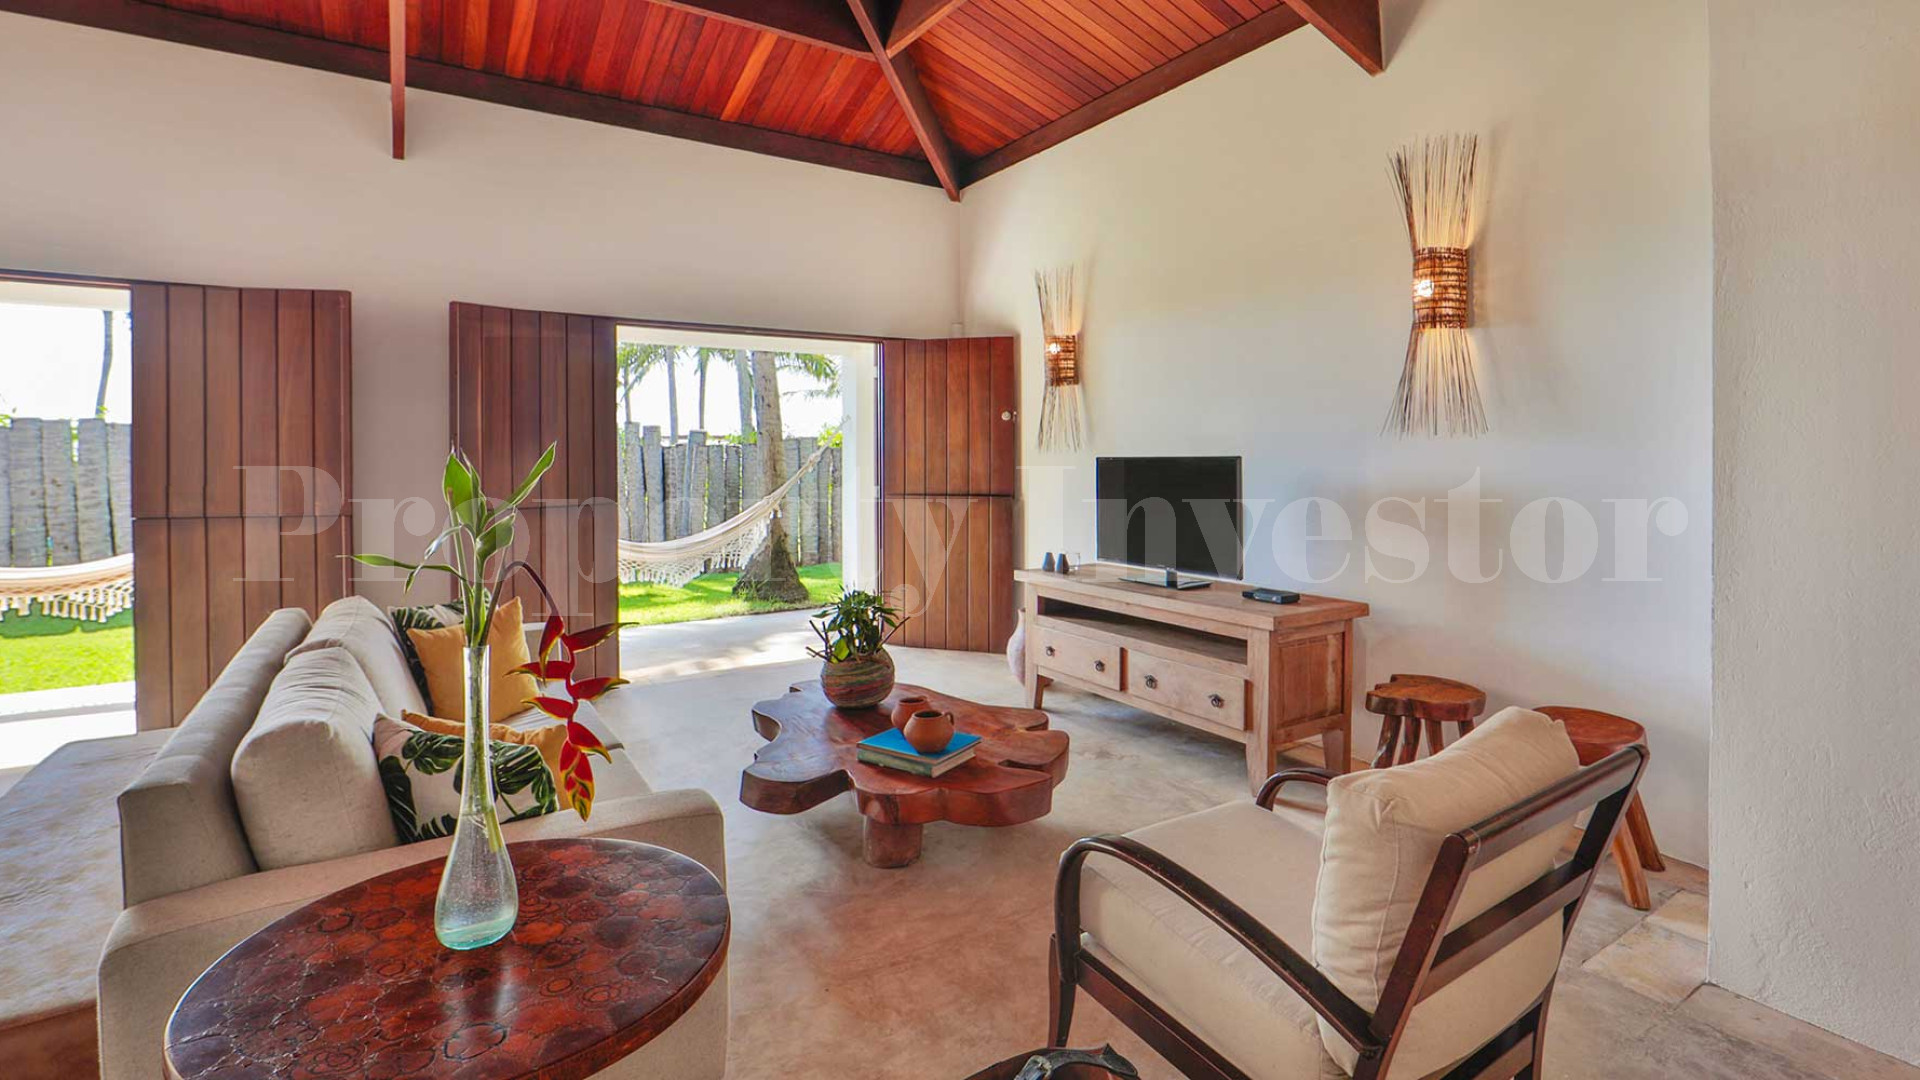 Stunning 8 Chalet Boutique Beachfront Hotel & Gourmet Restaurant Accessible to the Public for Sale in Japaratinga, Brazil